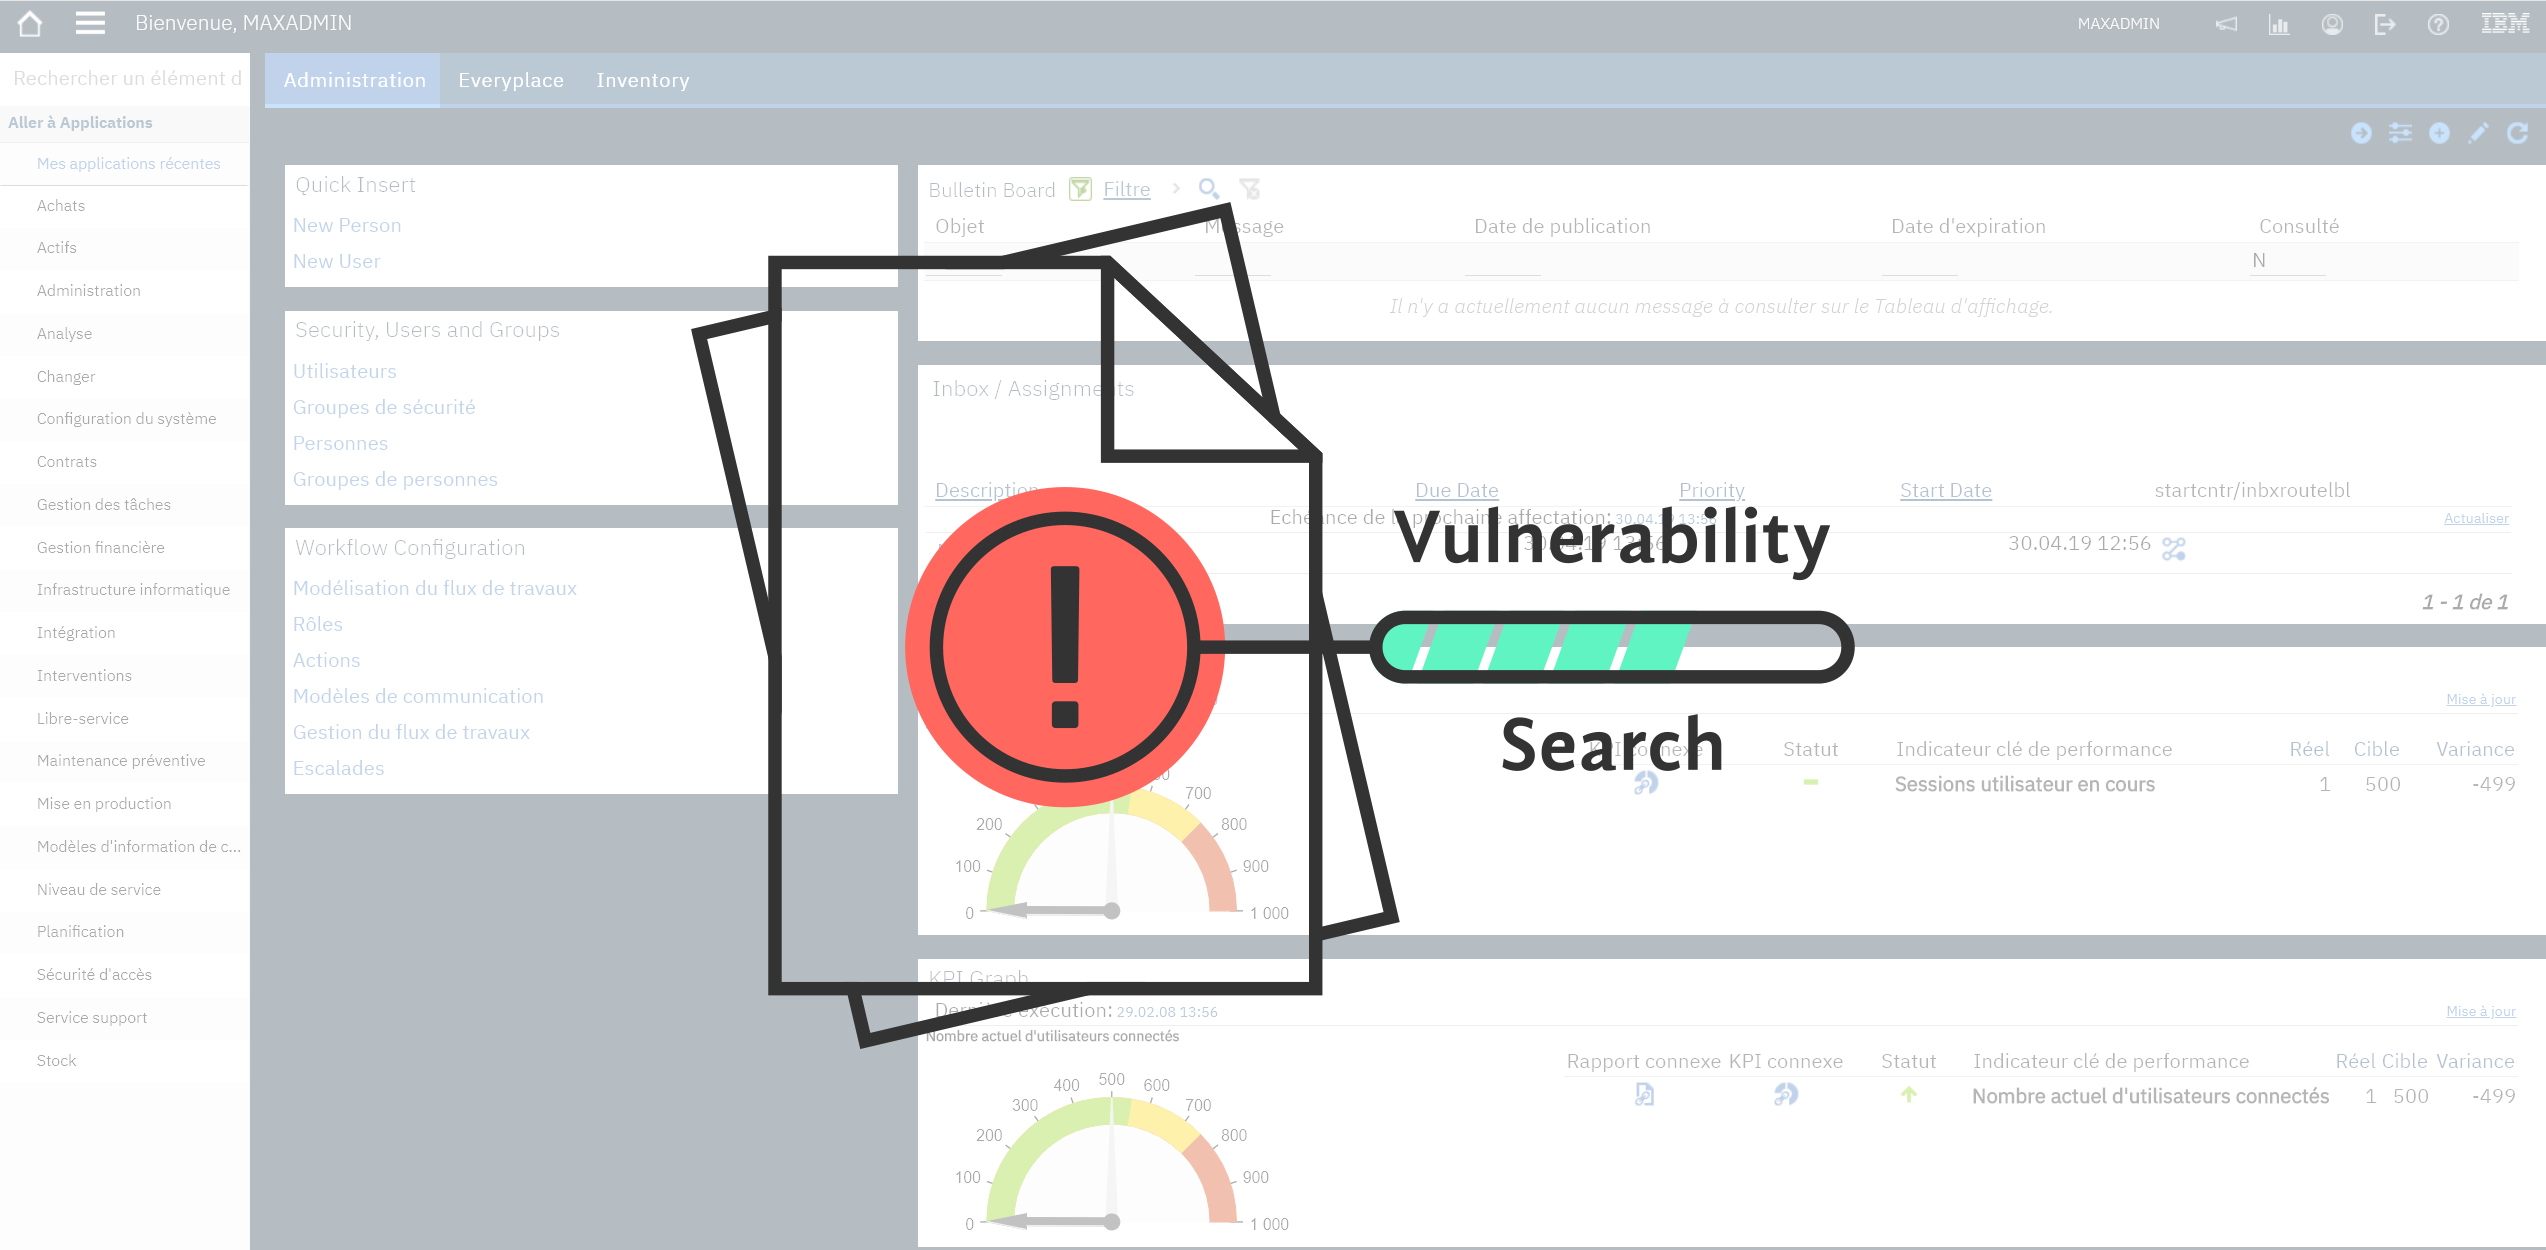 Security Vulnerability for Maximo 7.6.1.x